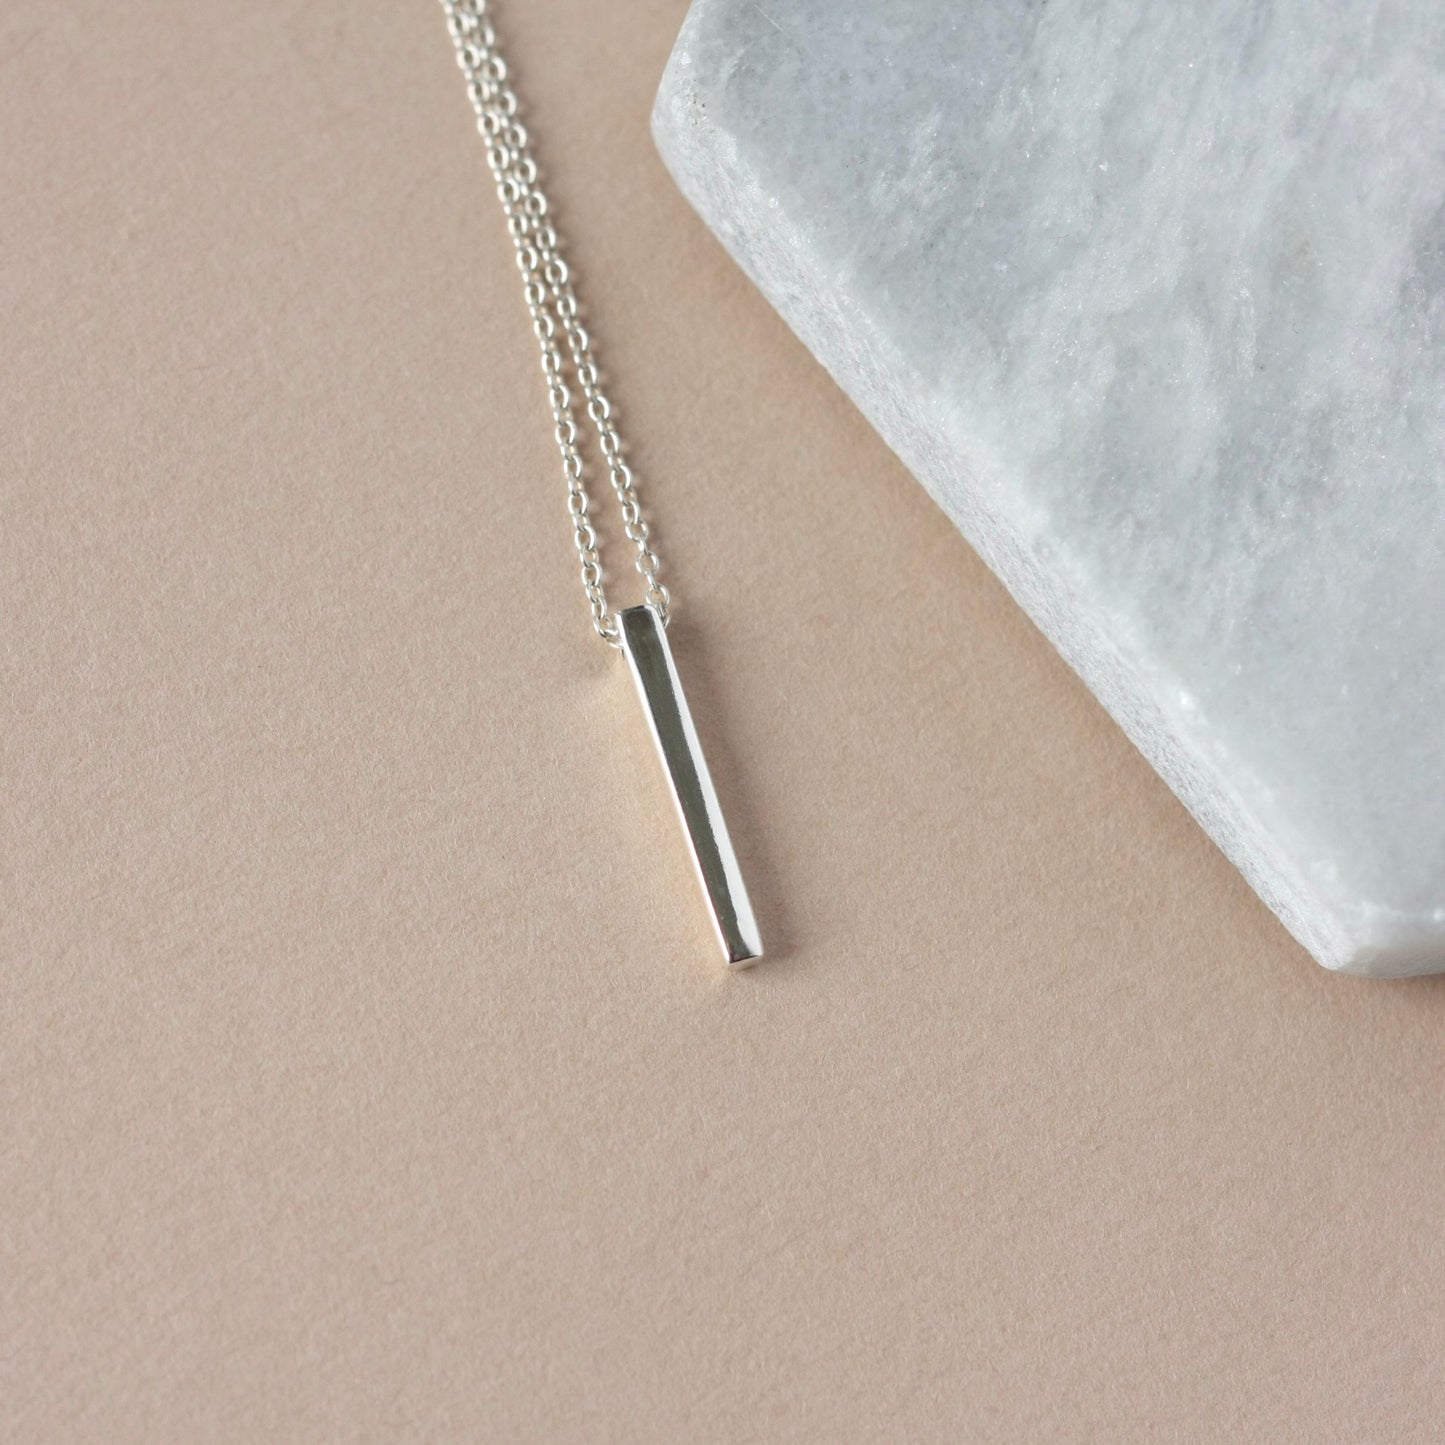 Minimalist Sterling Silver Bar Necklace